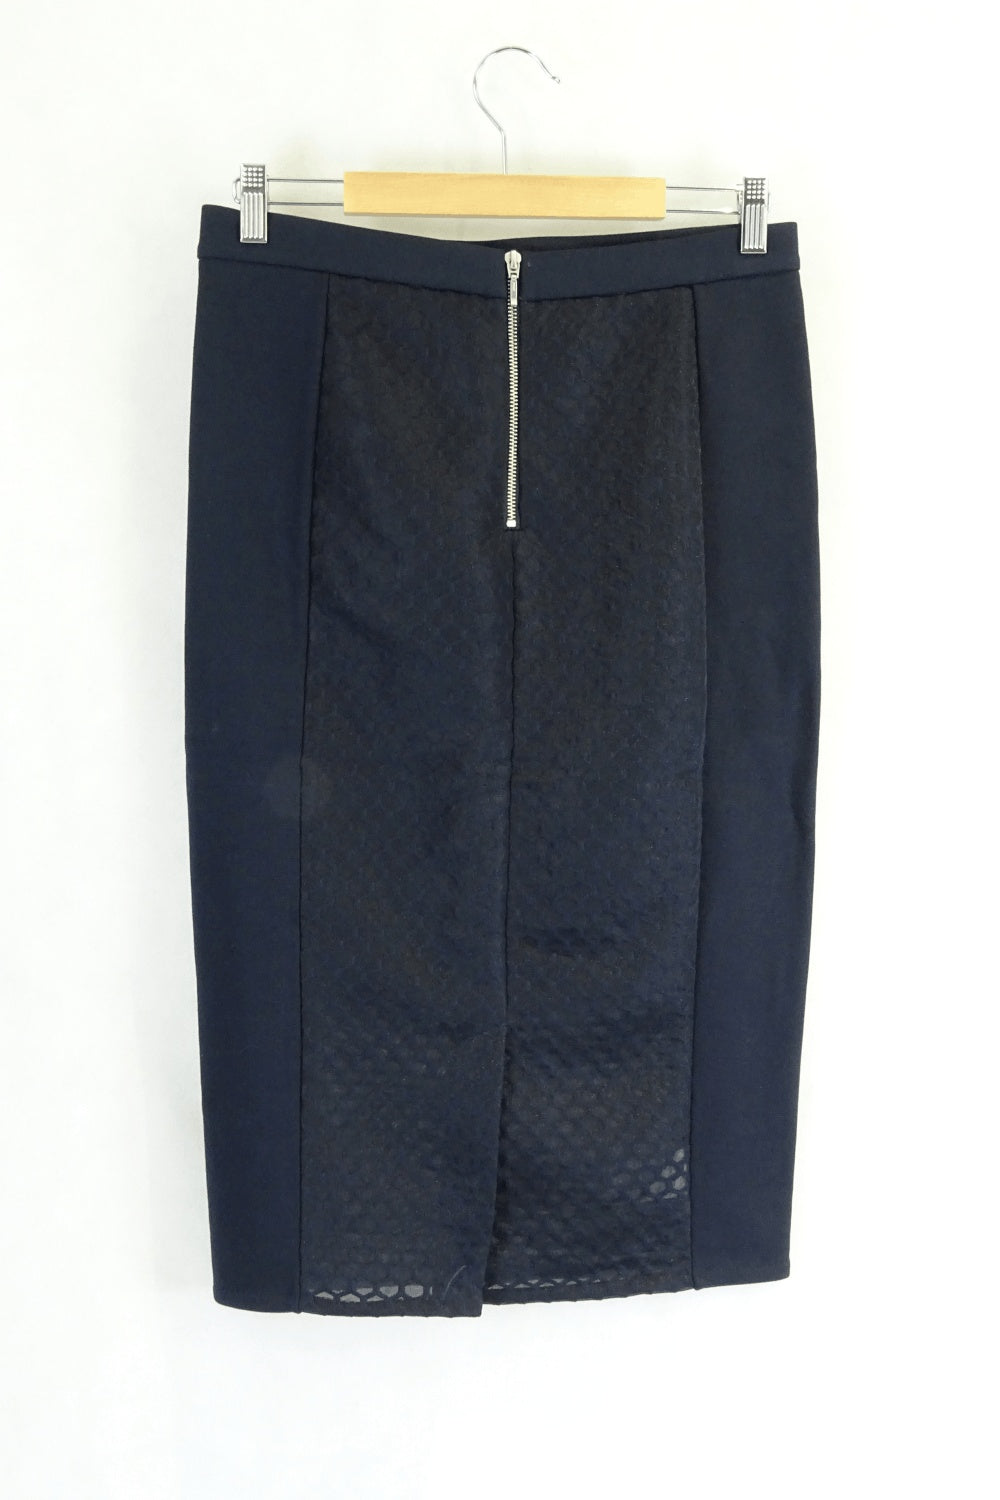 Country Road Navy Skirt M